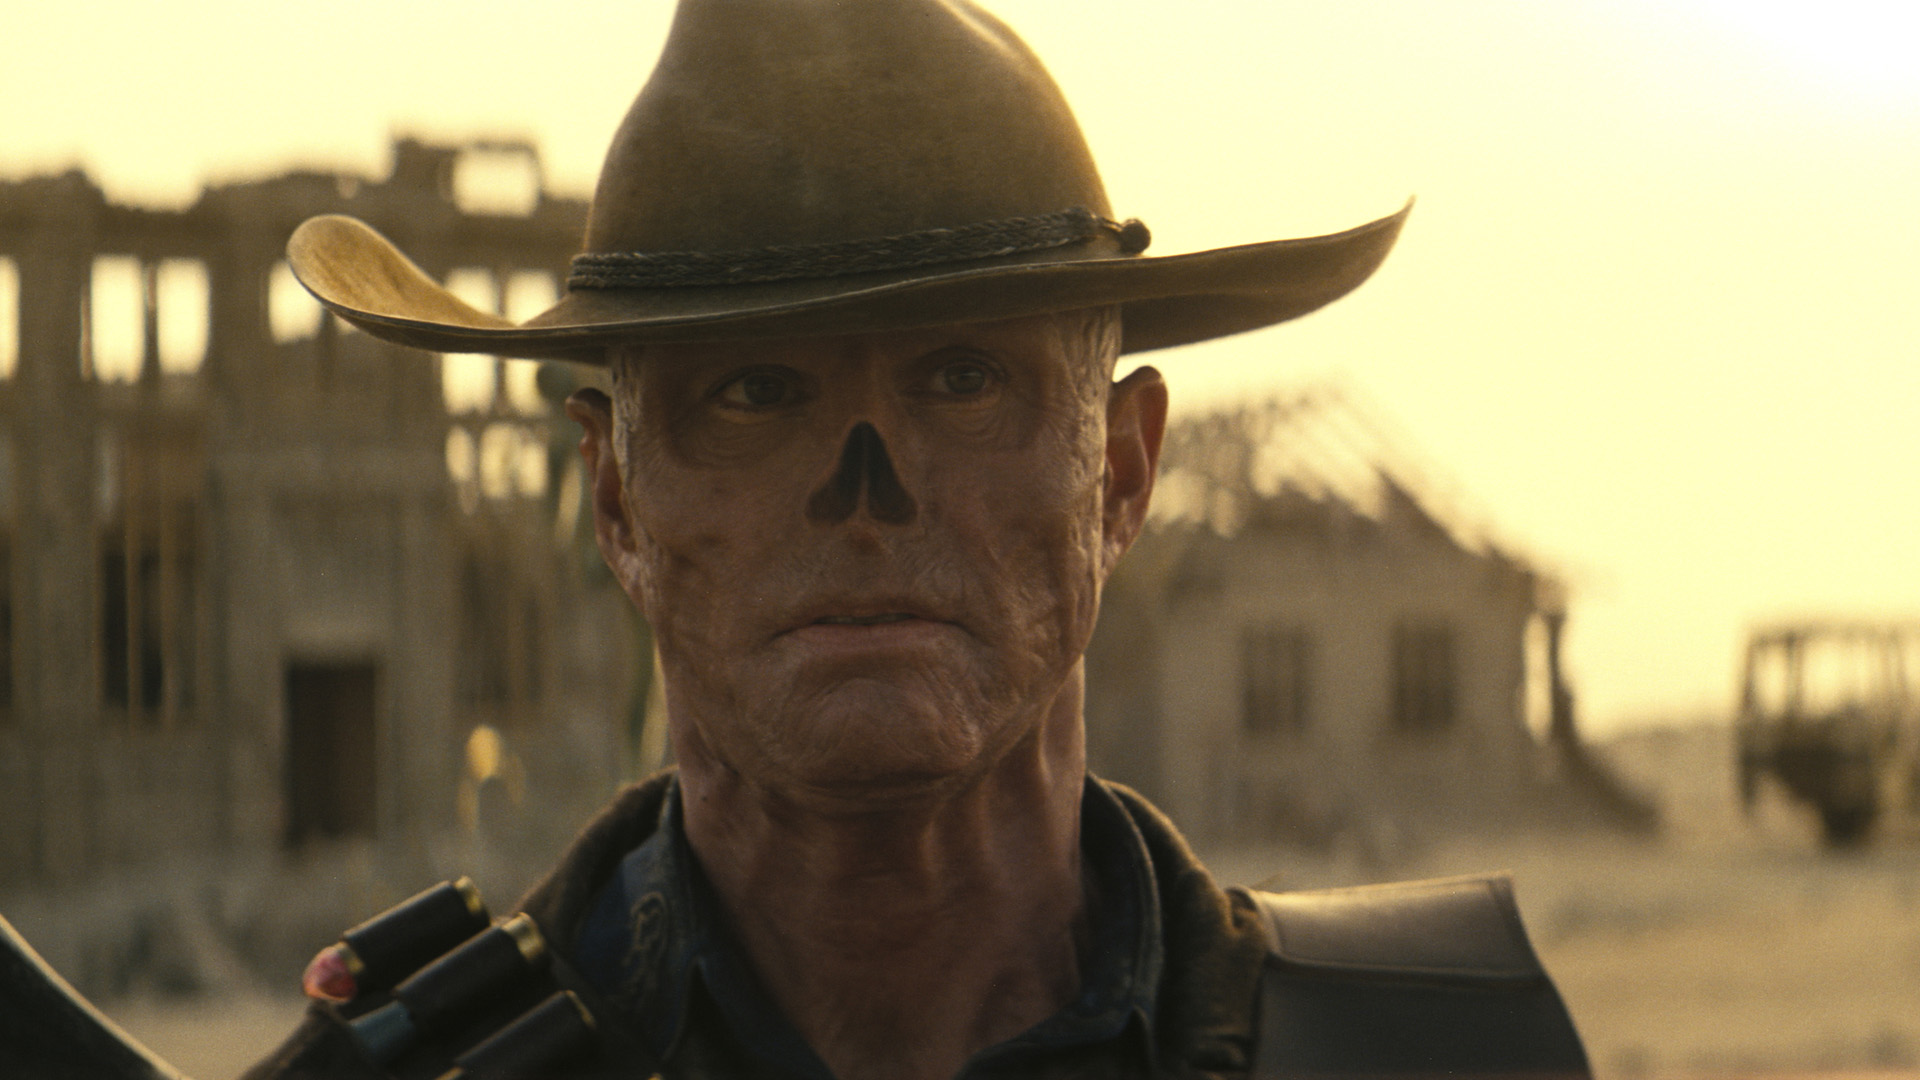 A close up of Walton Goggins' Ghoul character in a desert setting in Amazon's Fallout TV show